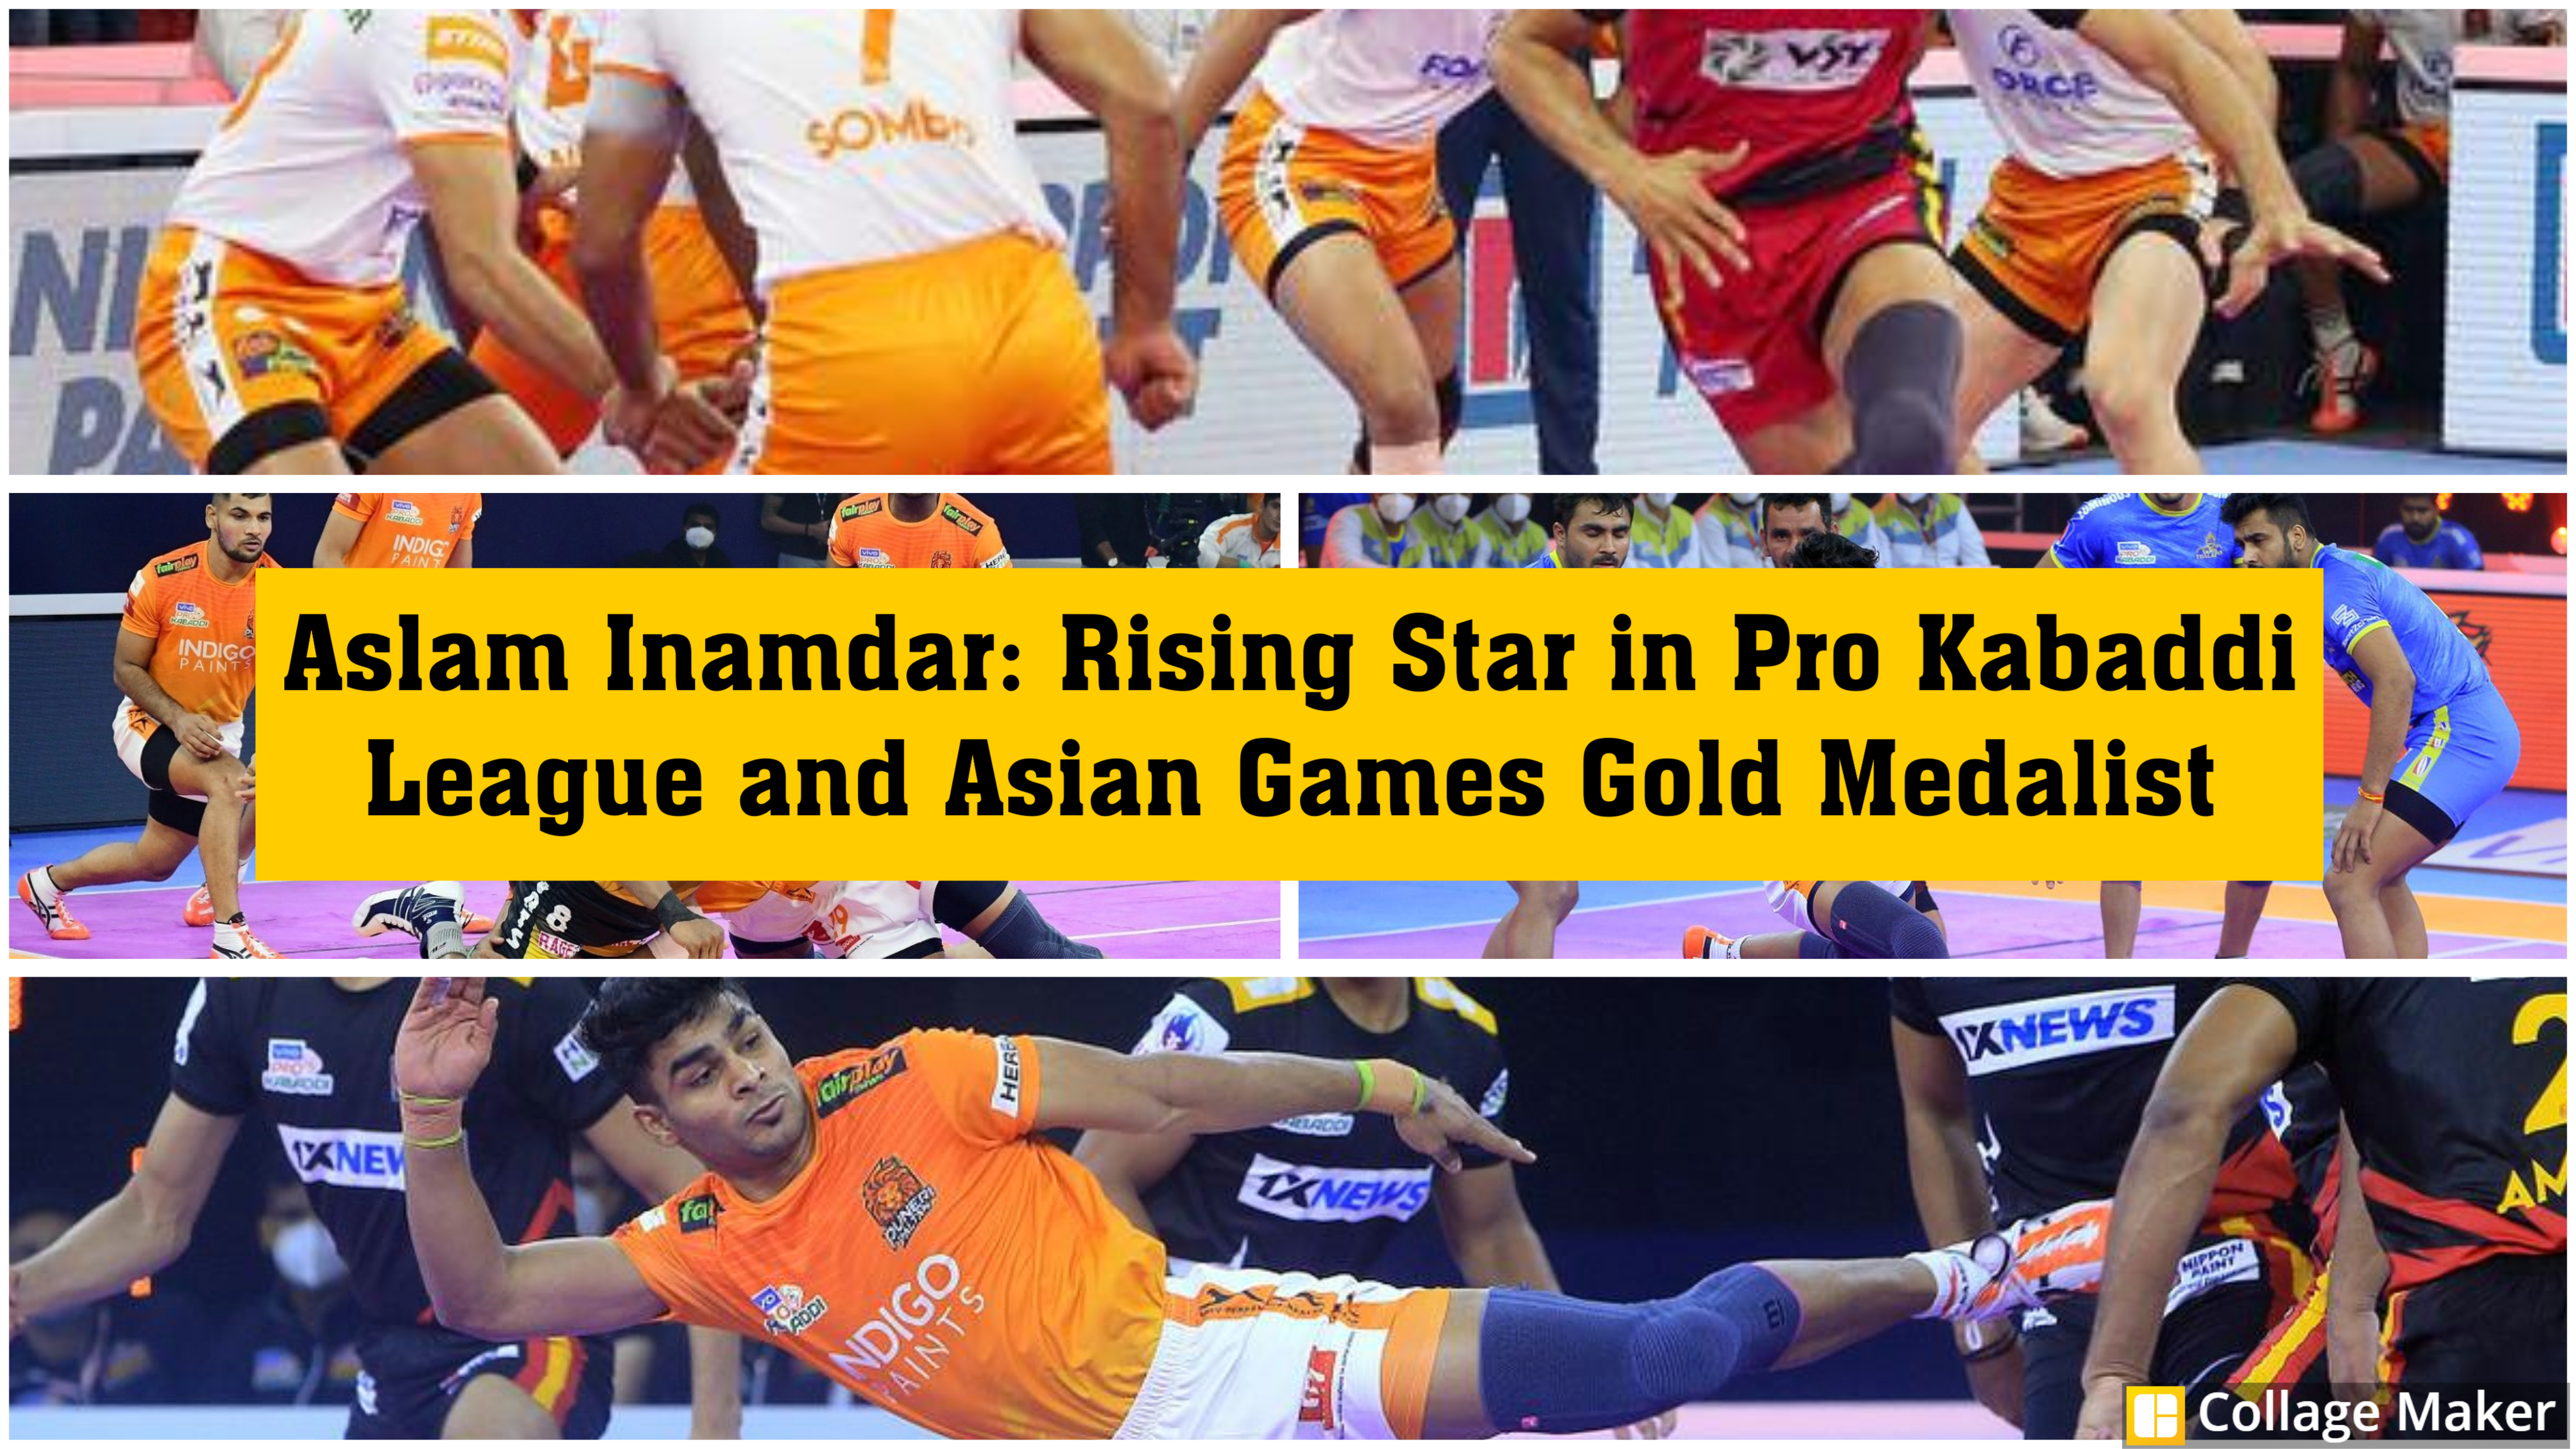 You are currently viewing Aslam Inamdar: Rising Star in Pro Kabaddi League and Asian Games Gold Medalist